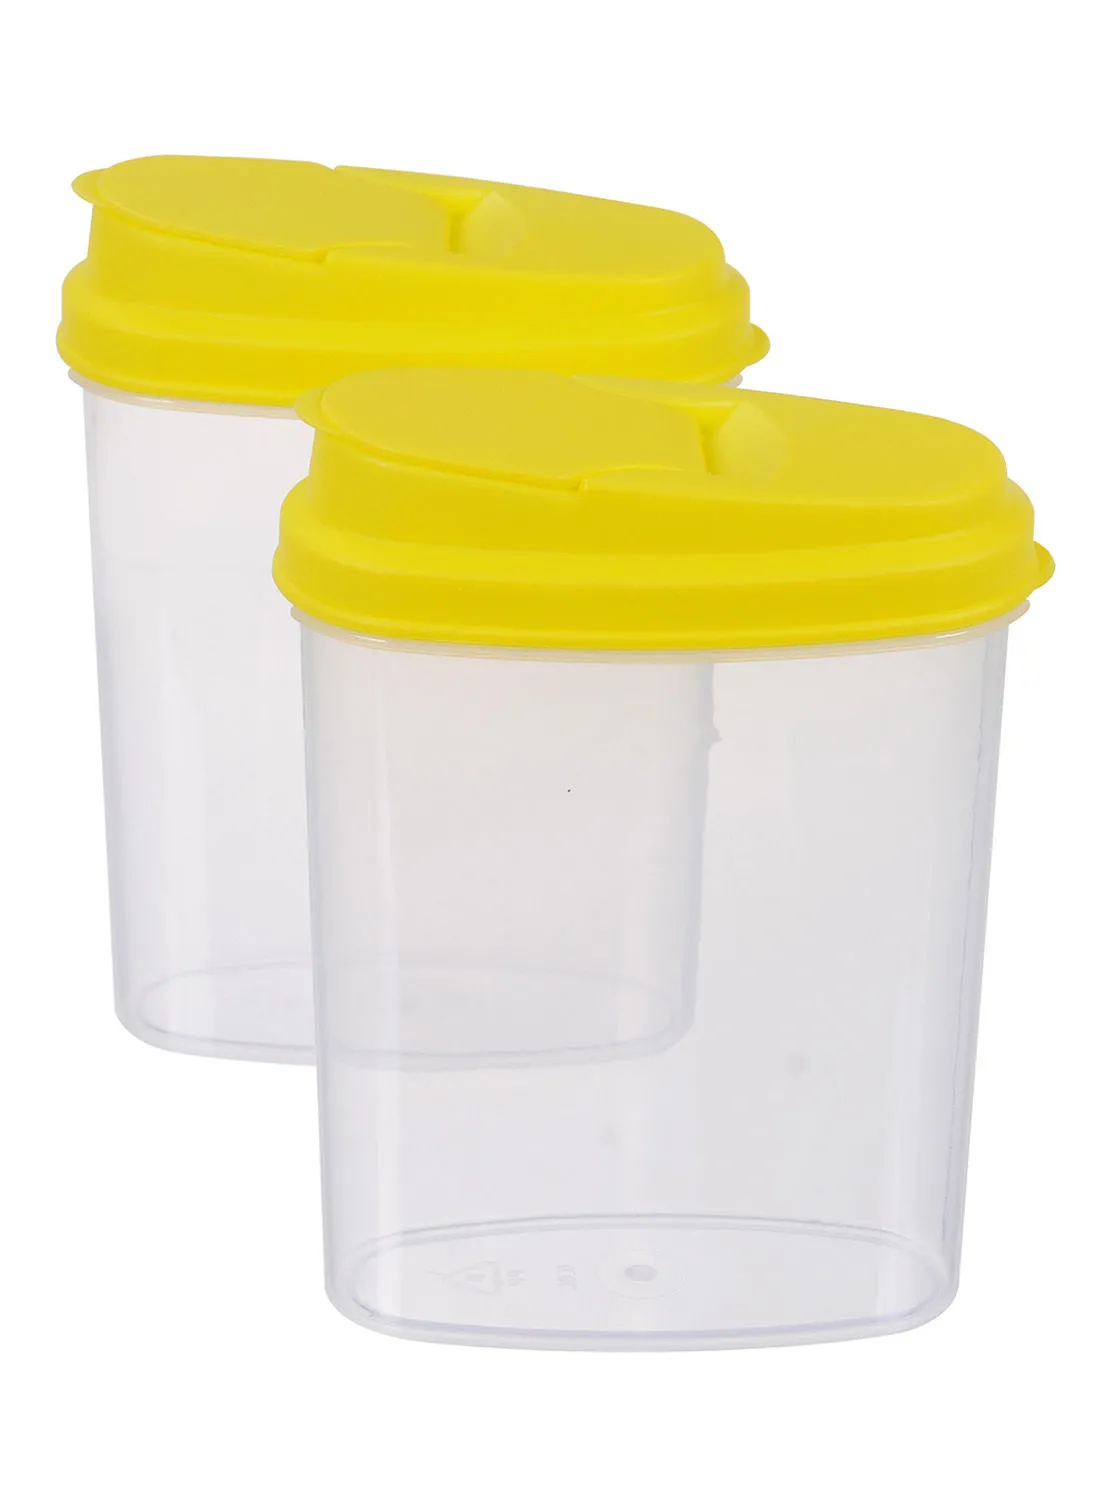 Amal 2 Piece Plastic Food Container Set - Easy Pour Lids - Food Storage Box - Storage Boxes - Kitchen Cabinet Organizers - Yellow